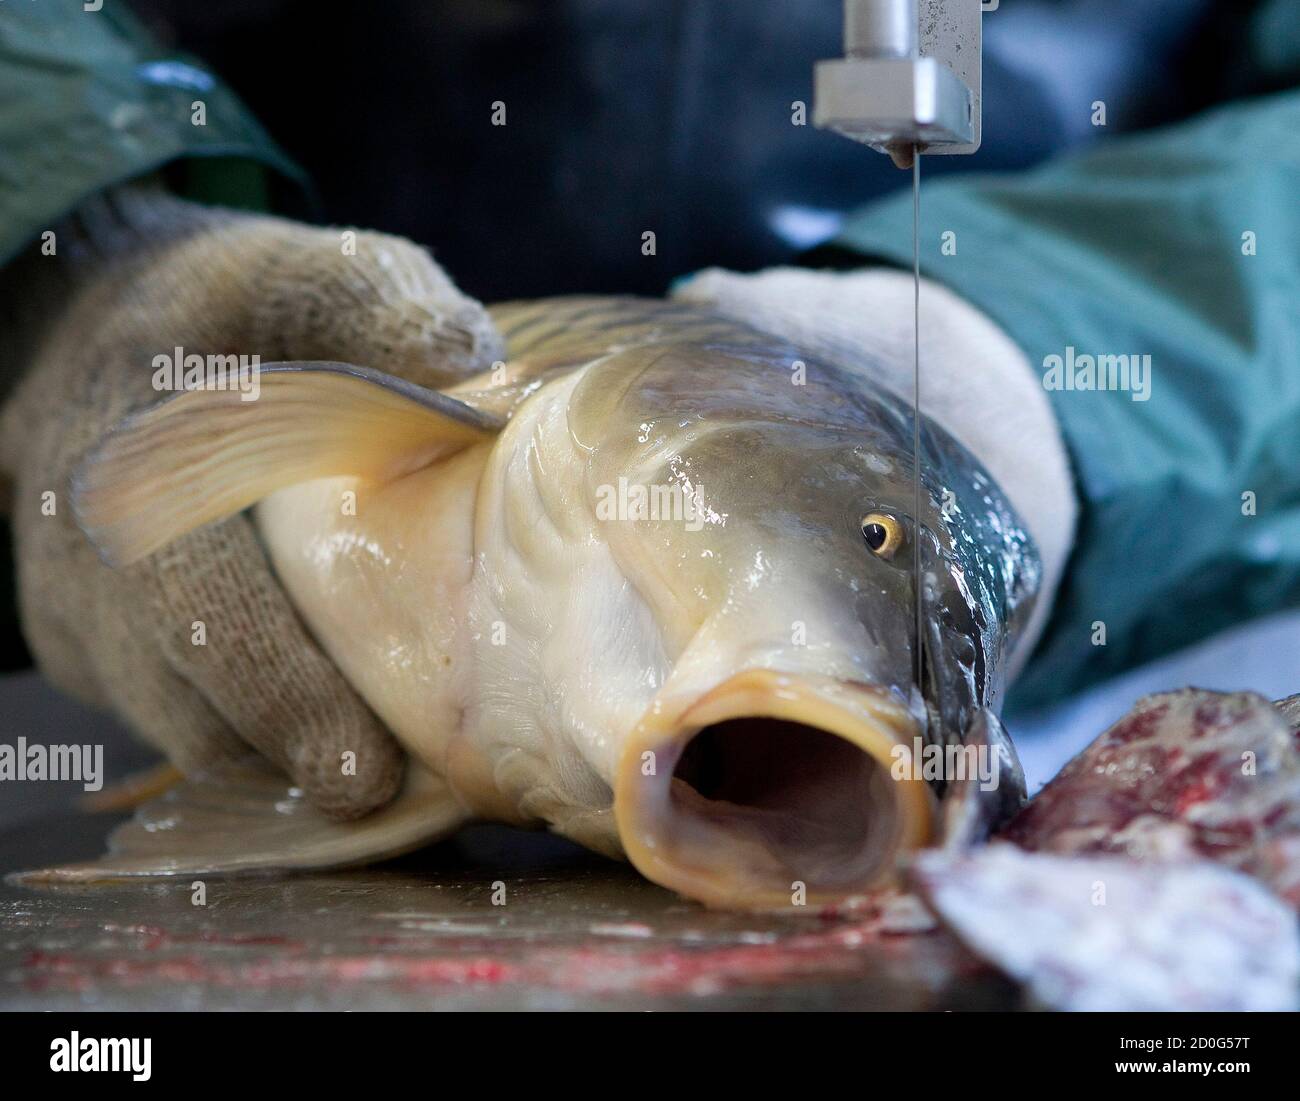 An employee prepares a carp for the removal of its hypophysis gland at a state fish farm in the village of Aziorny, some 50 km (31 miles) east of Minsk, March 16, 2011. The gland is used to stimulate the excretion of a hormone, which when injected into other carps speeds up spawning independent of weather conditions.  REUTERS/Vasily Fedosenko  (BELARUS - Tags: ANIMALS ENVIRONMENT SOCIETY) Stock Photo